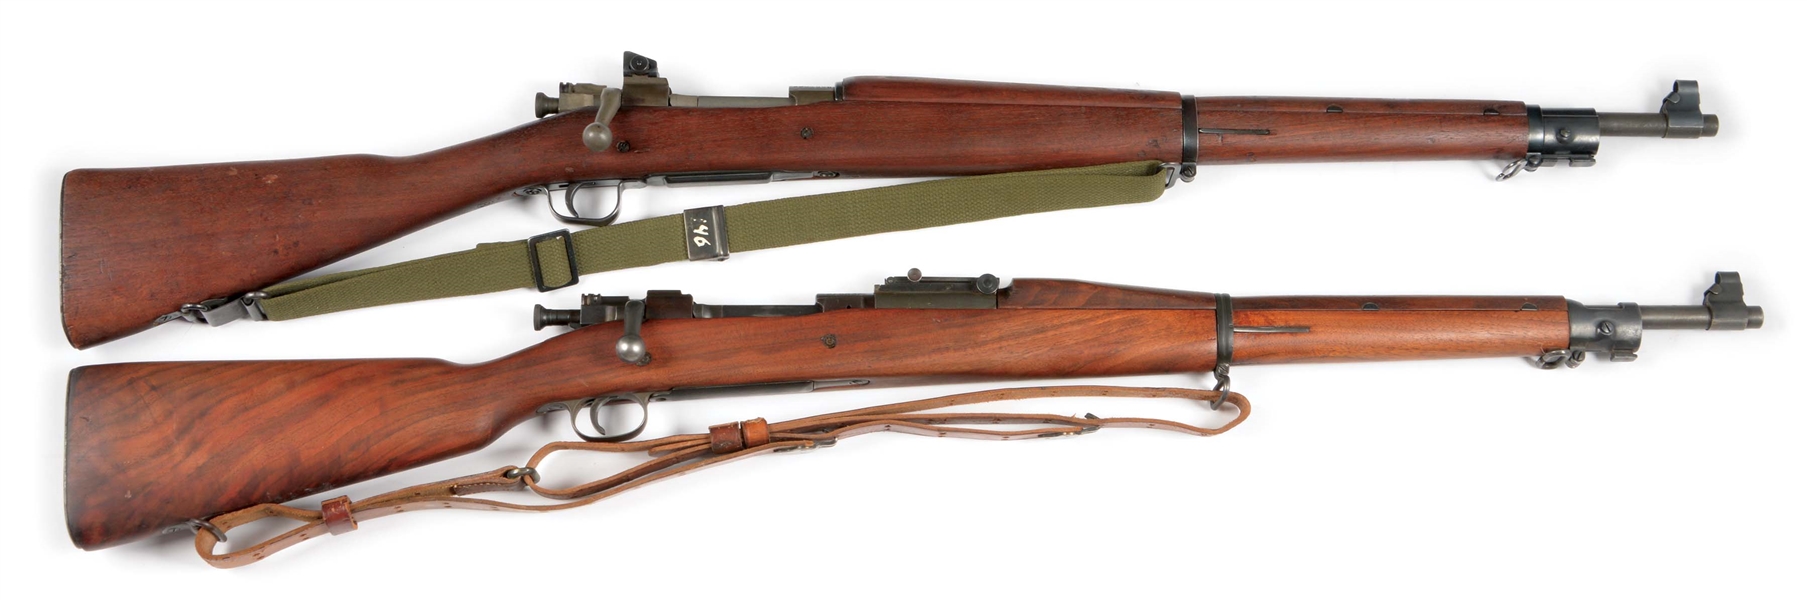 (C) LOT OF TWO: 1903A3 AND 1903 REMINGTON AND ROCK ISLAND RIFLES.